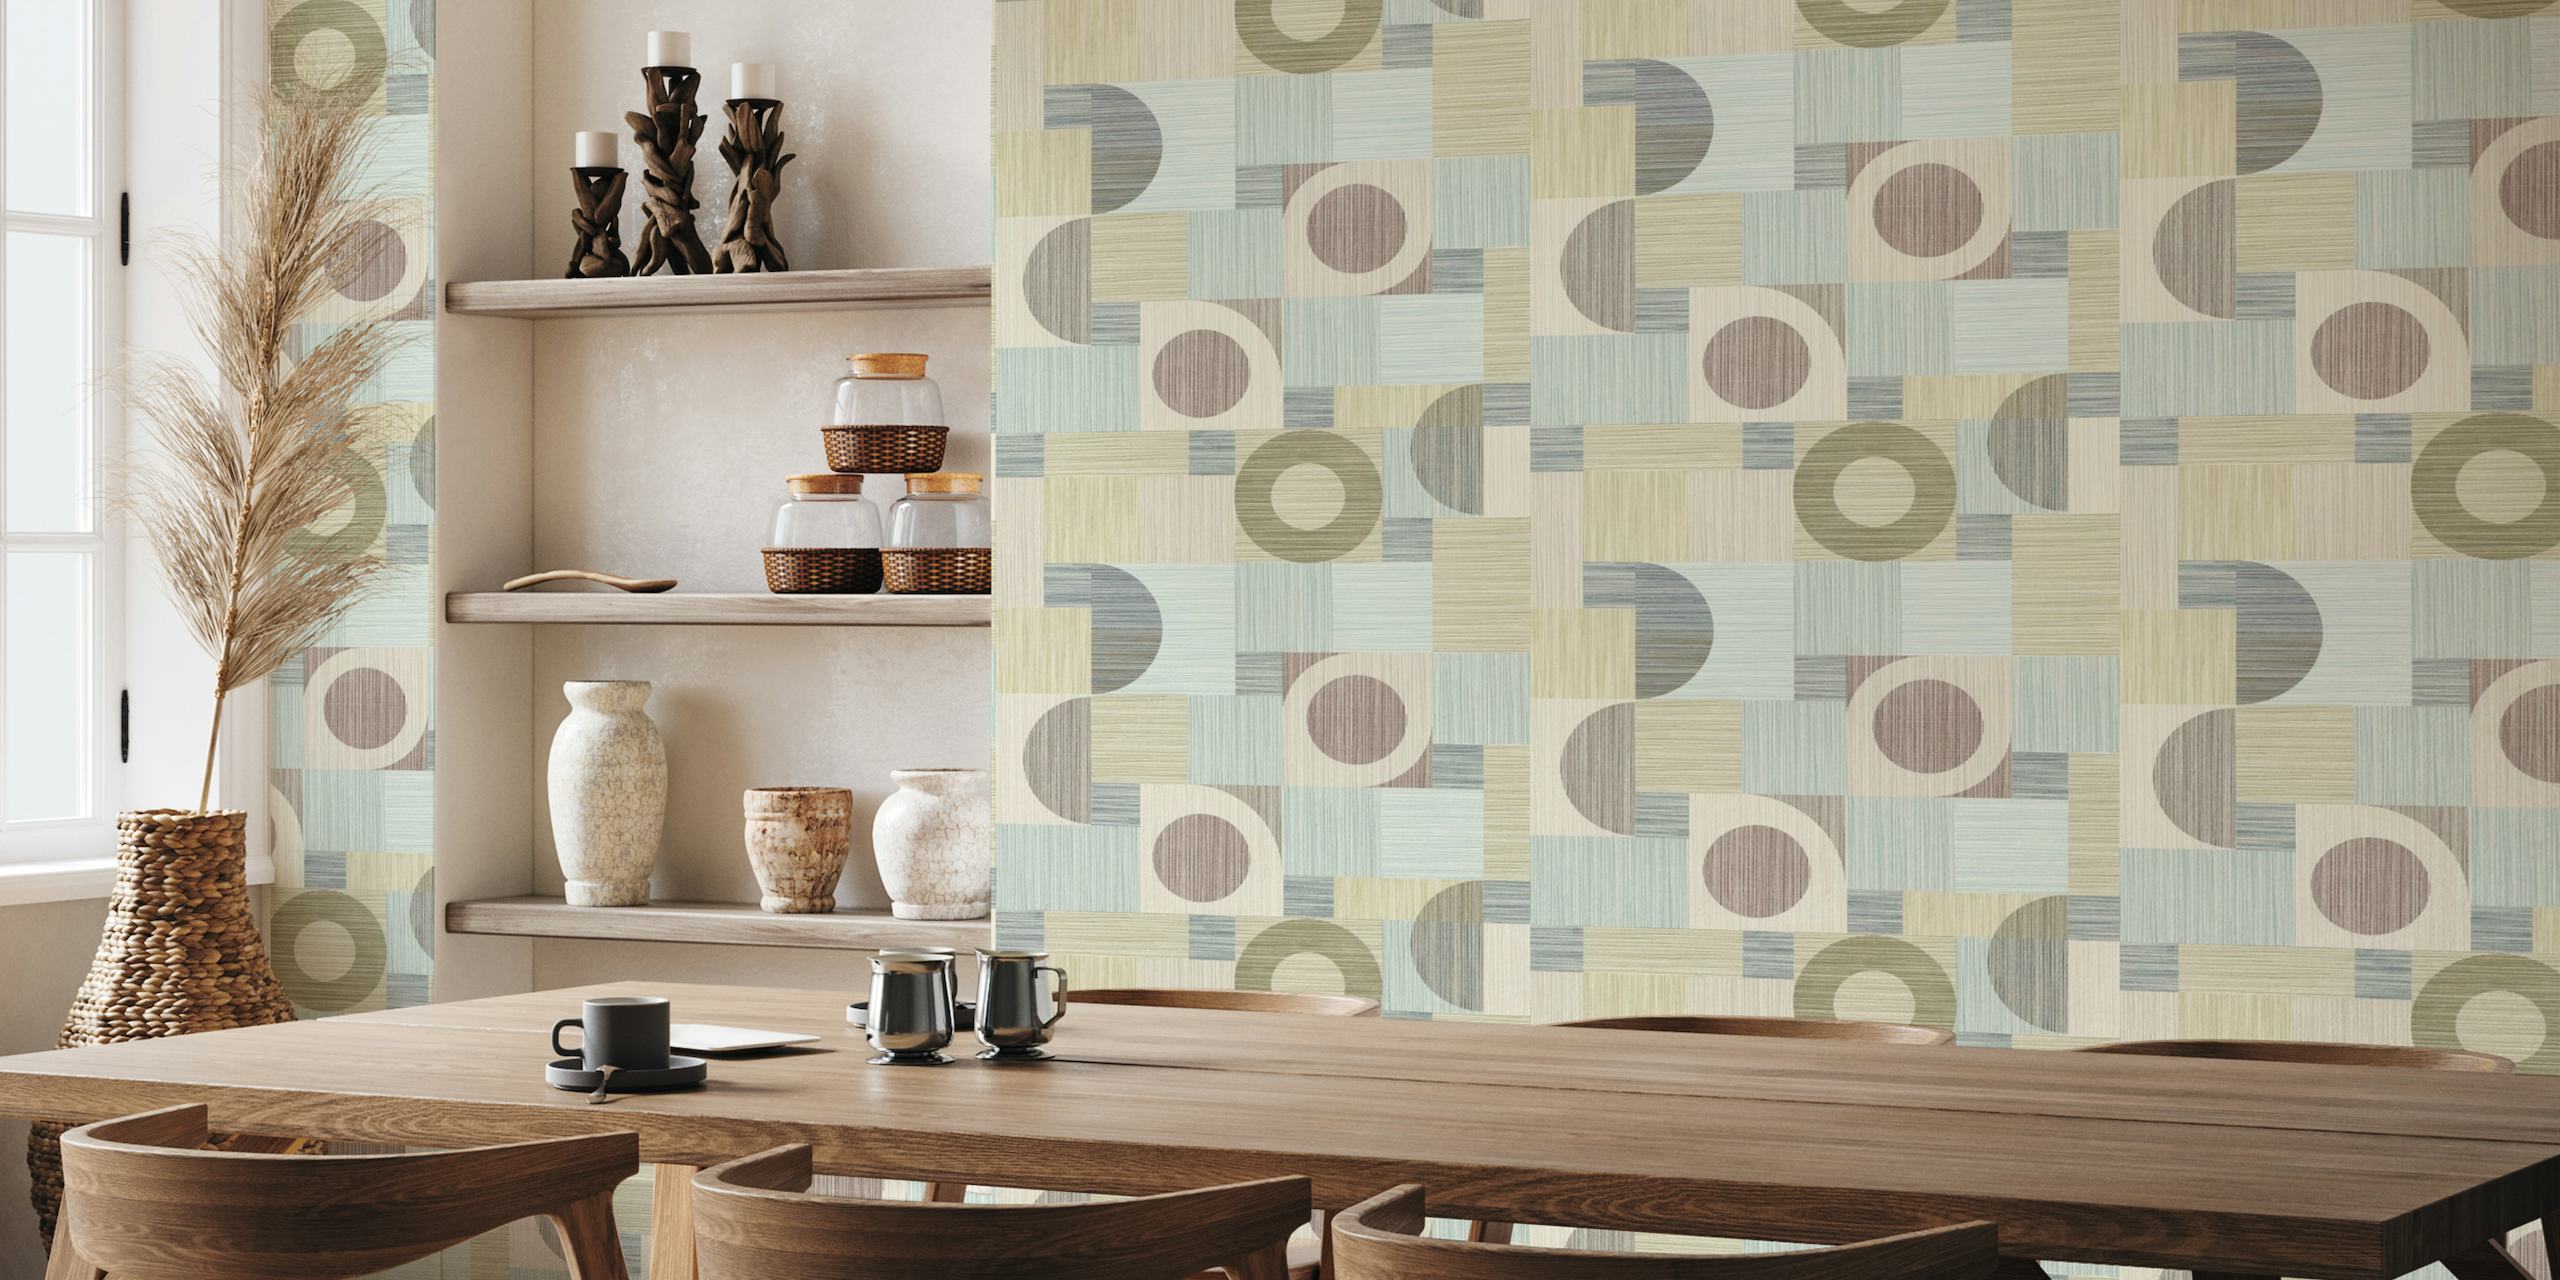 Geo-Stripes wall mural with beige and grey geometric stripes and circles